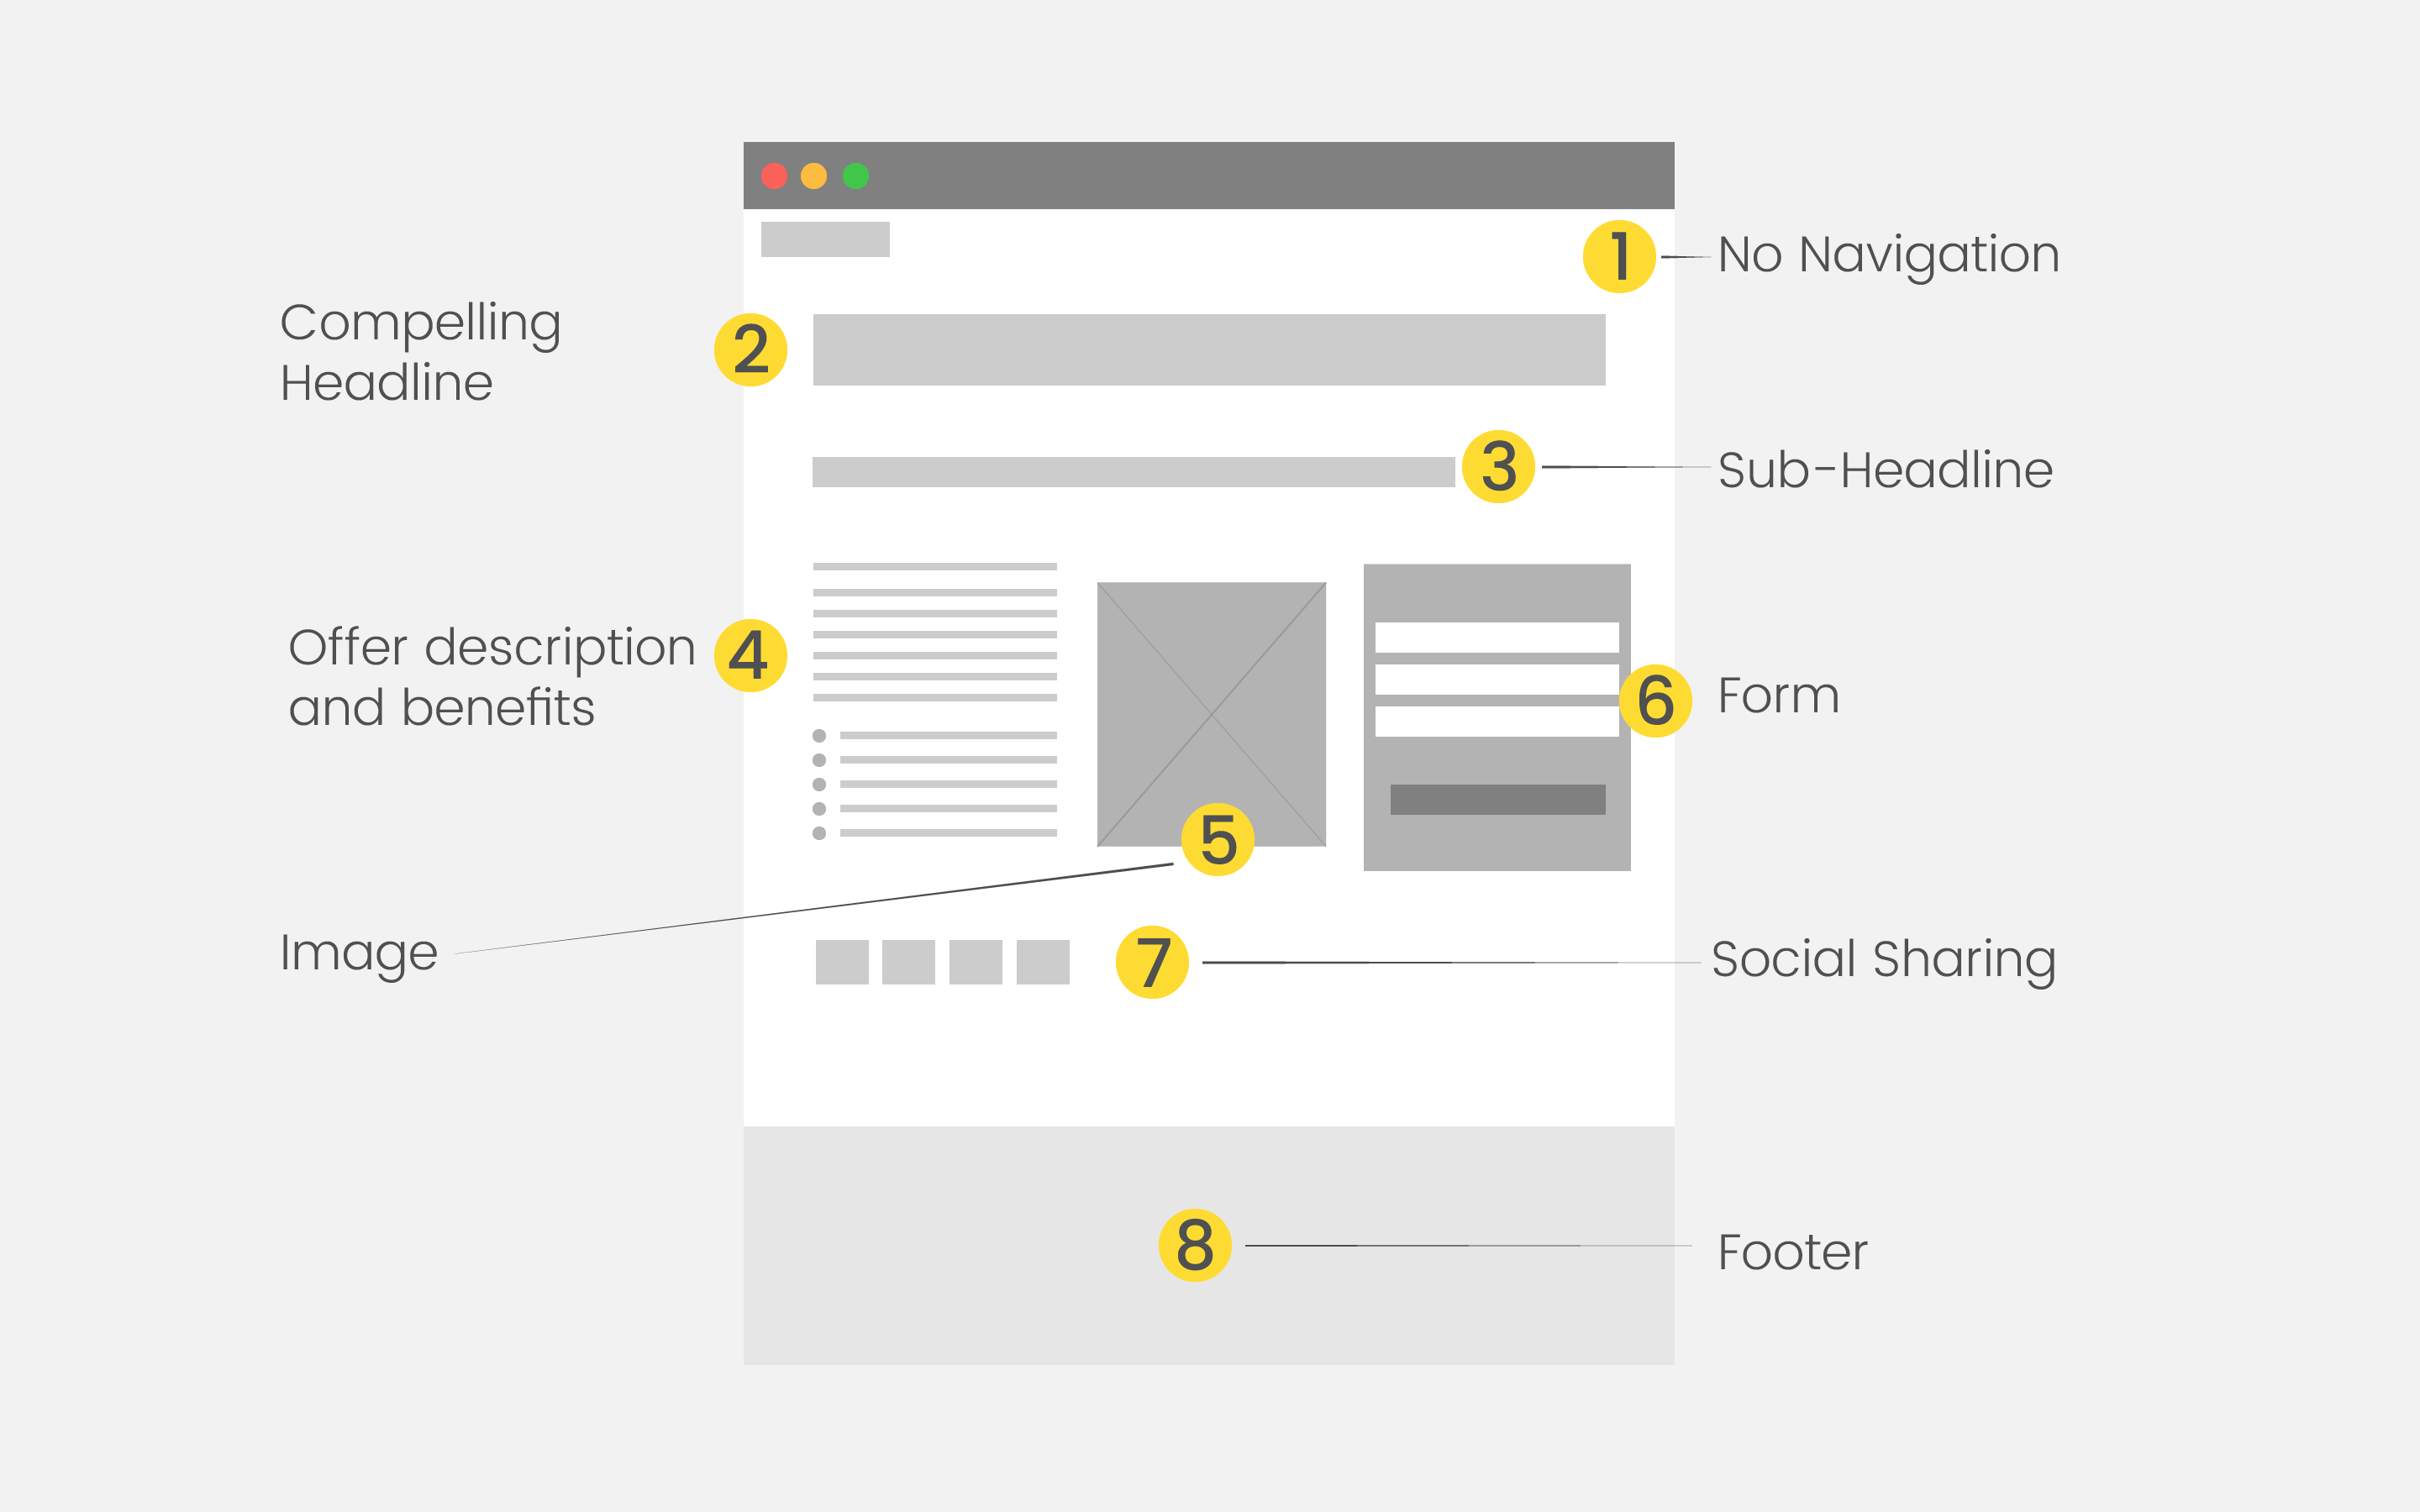 Guide To Running An Inbound Marketing Campaign - Inbound Landing Page Structure Image